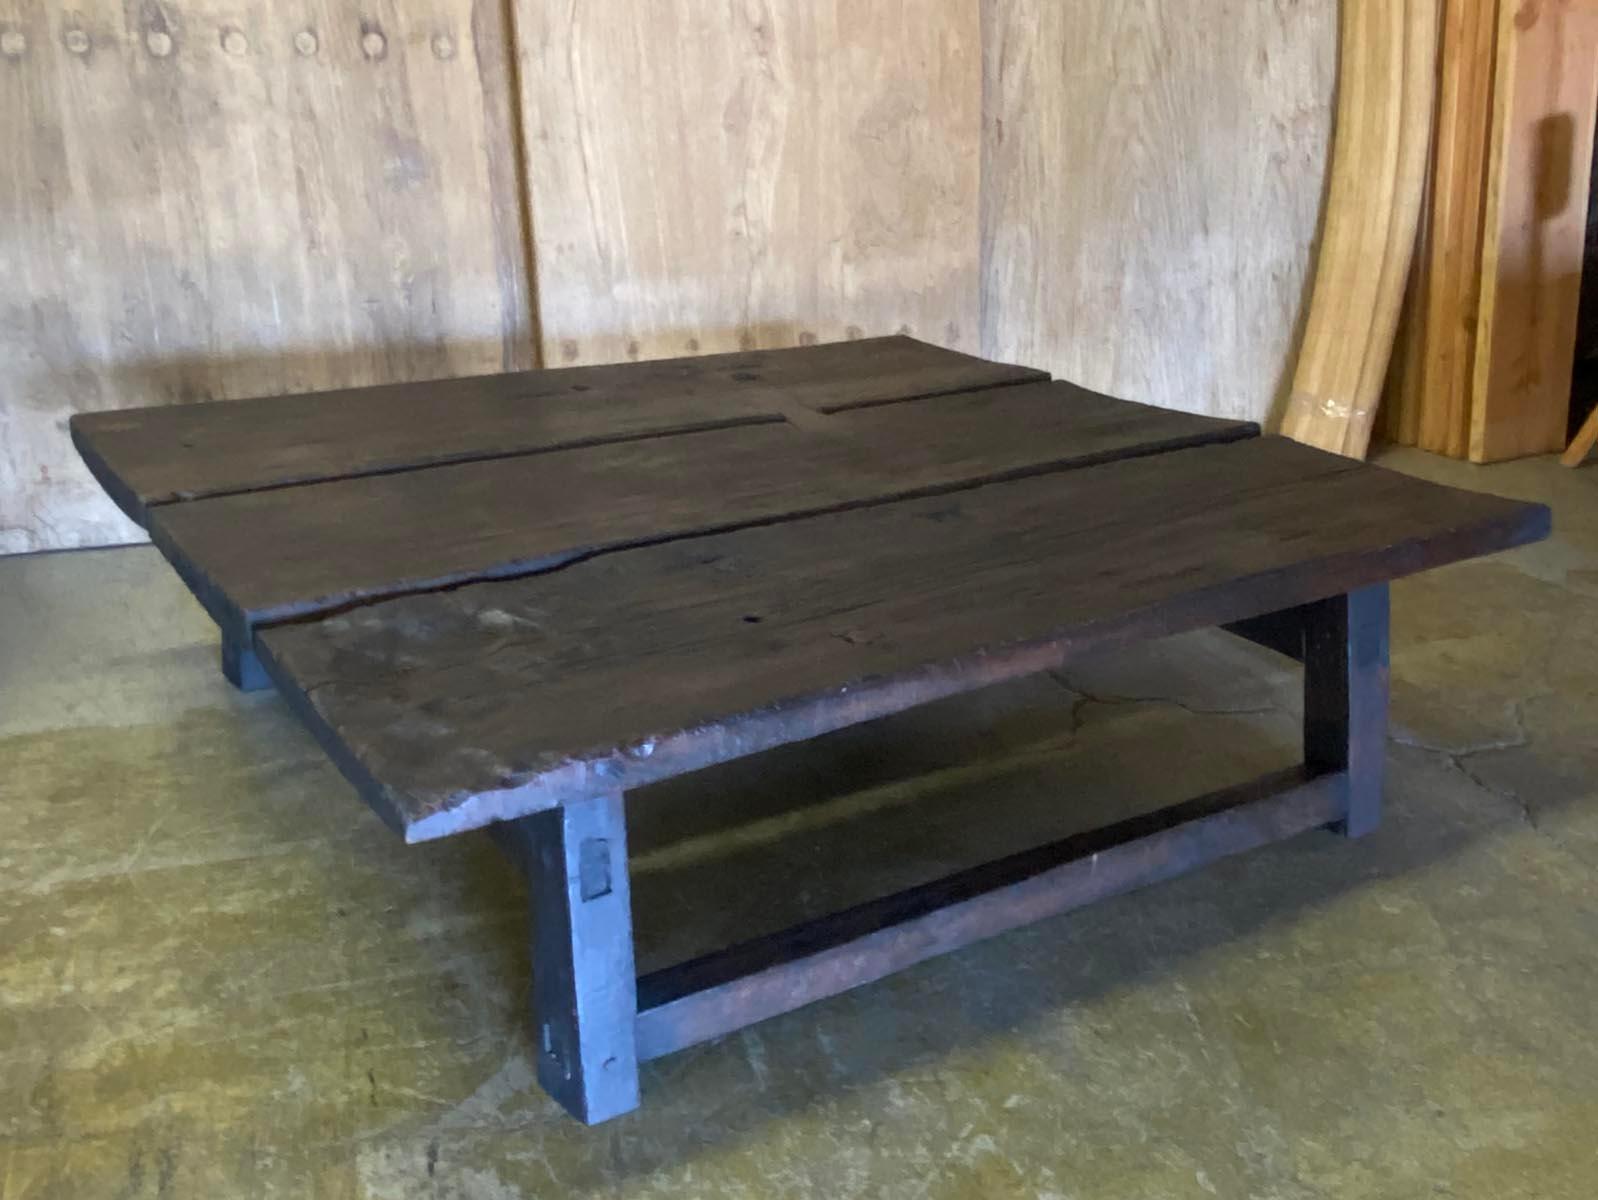 This coffee table was made from a 19th century long, skinny 